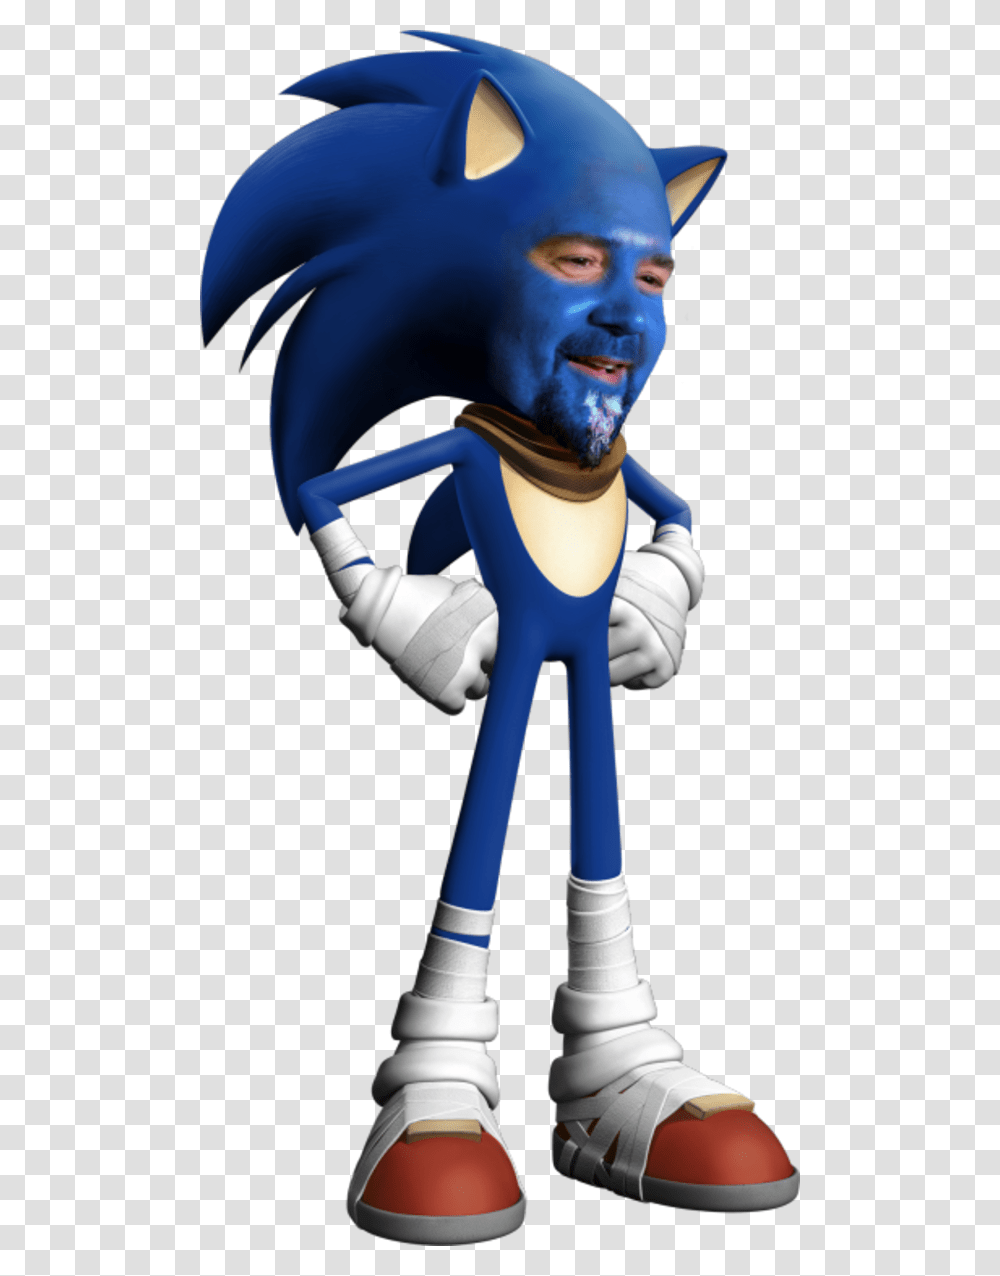 Guy The Hedgehog Guy Fieri Know Your Meme, Toy, Figurine Transparent Png